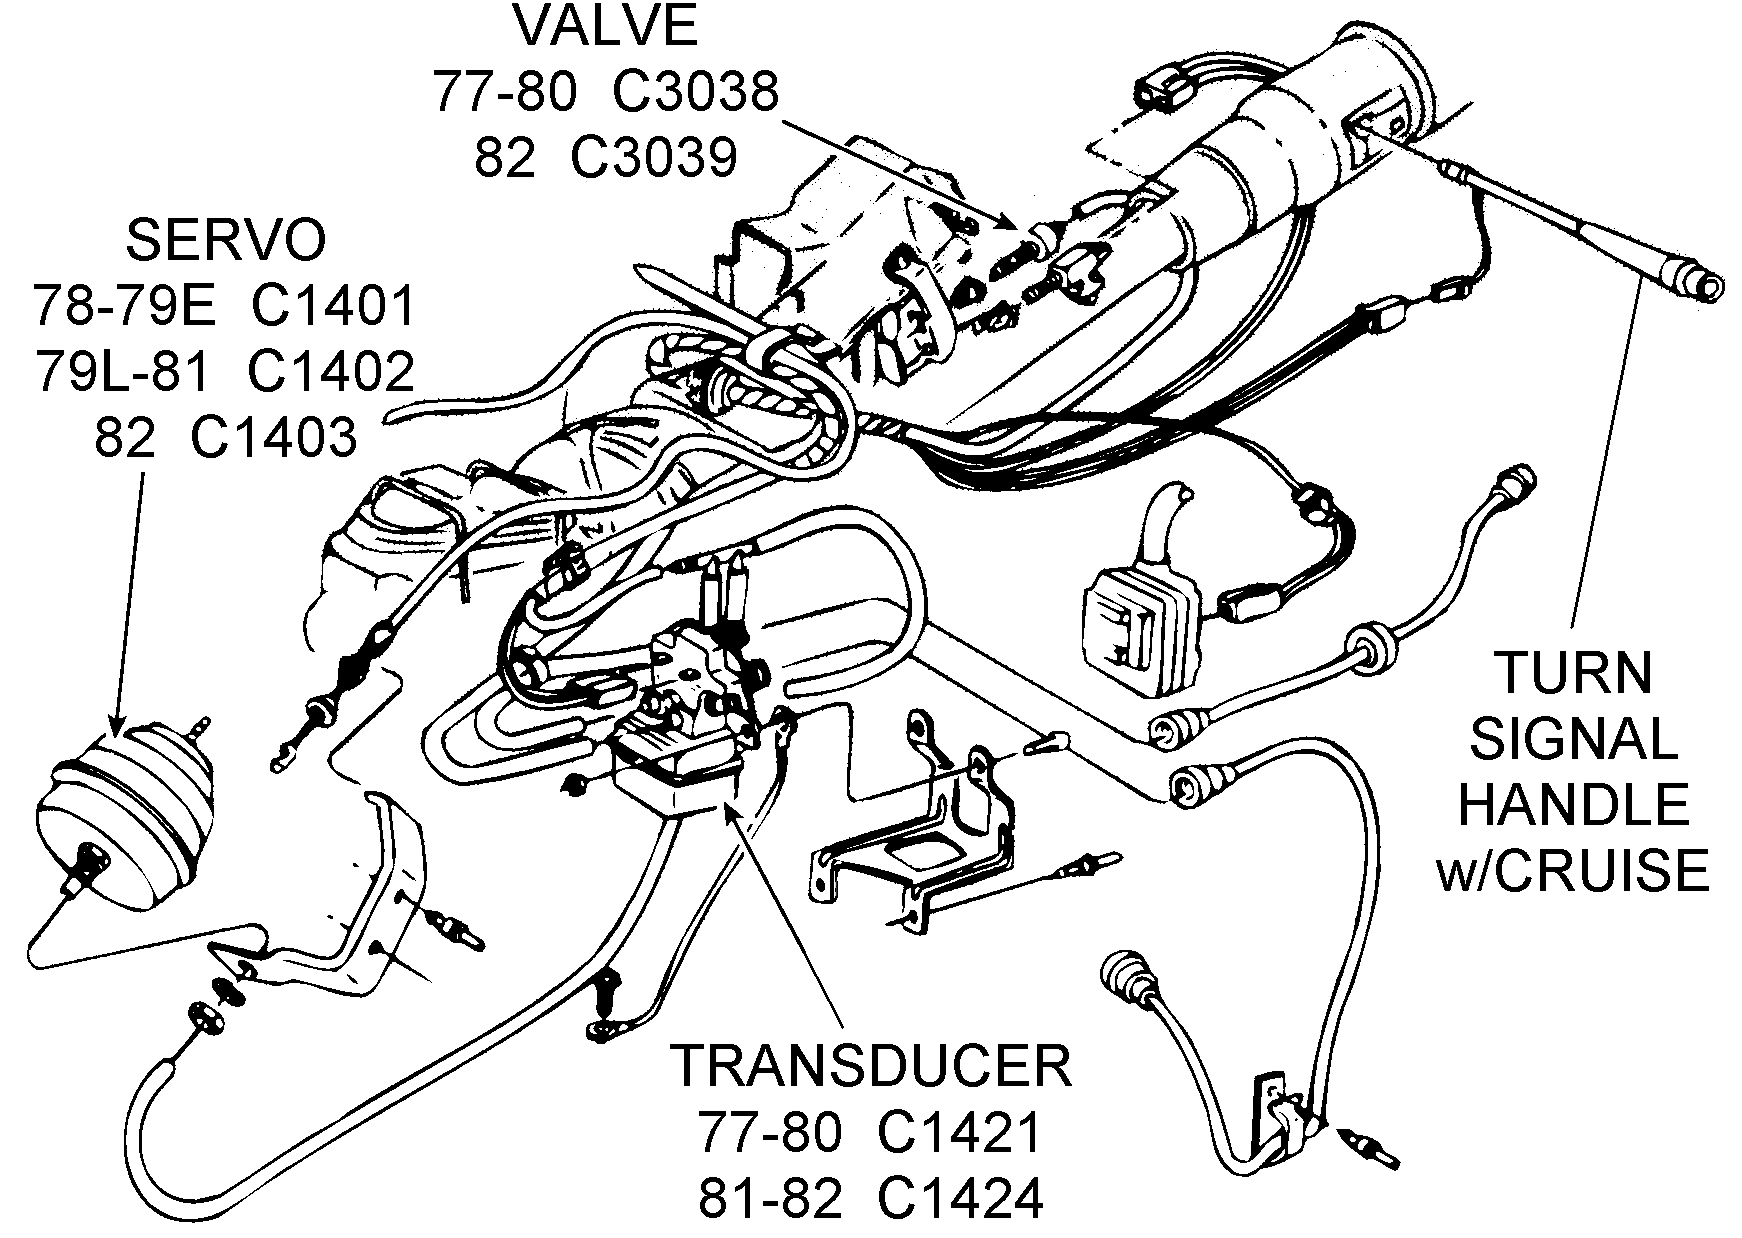 Cruise Control - Diagram View - Chicago Corvette Supply 1979 mgb wiring harness 